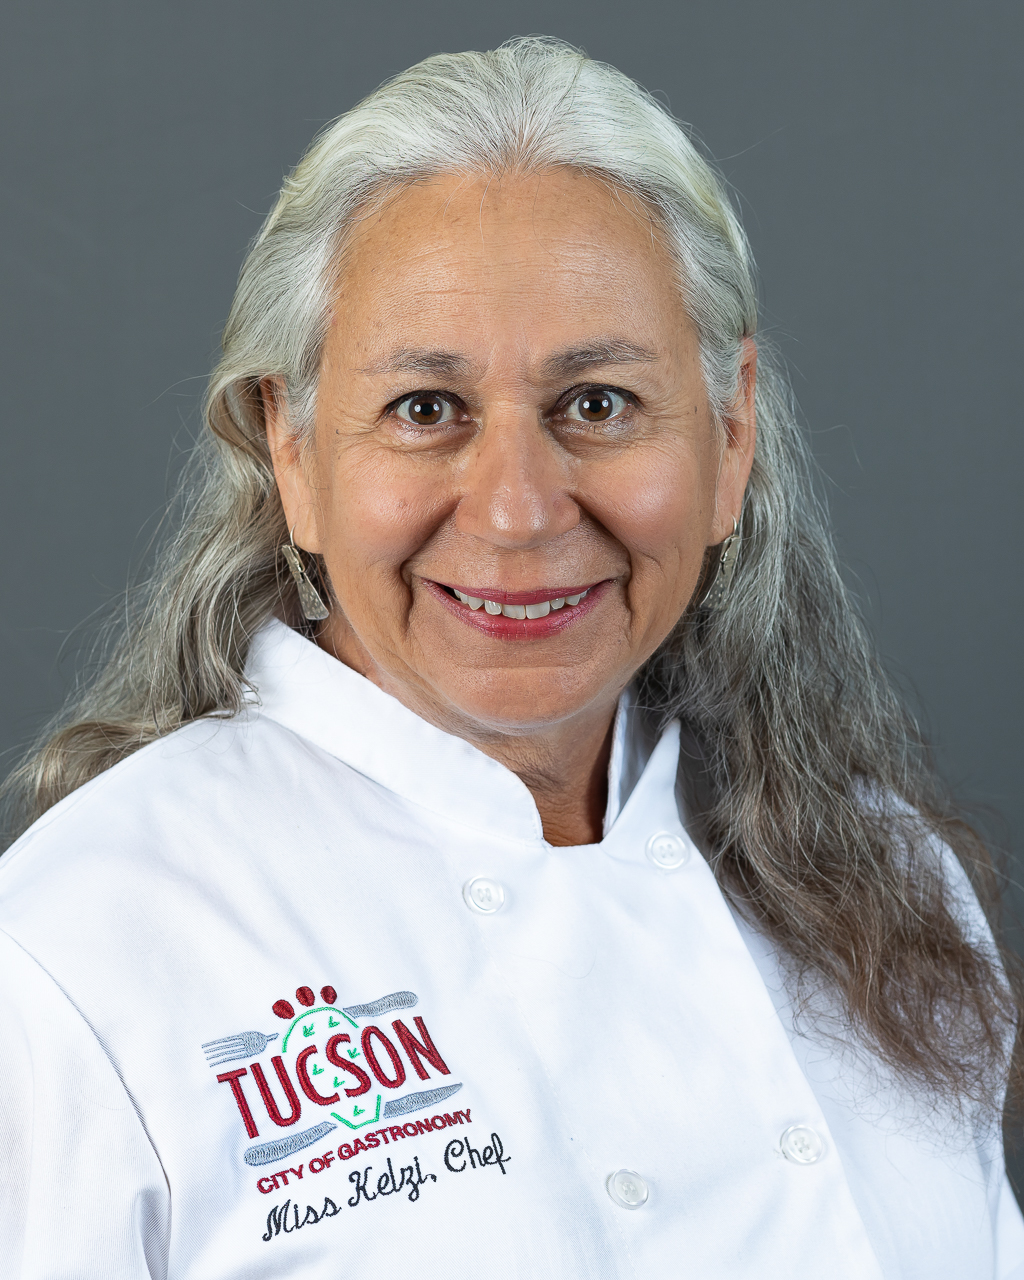 Portrait of Chef Kelzi Bartholmaei in preparation for a Unesco (United Nations Educational, Scientific and Cultural Organization) event in Mexico.